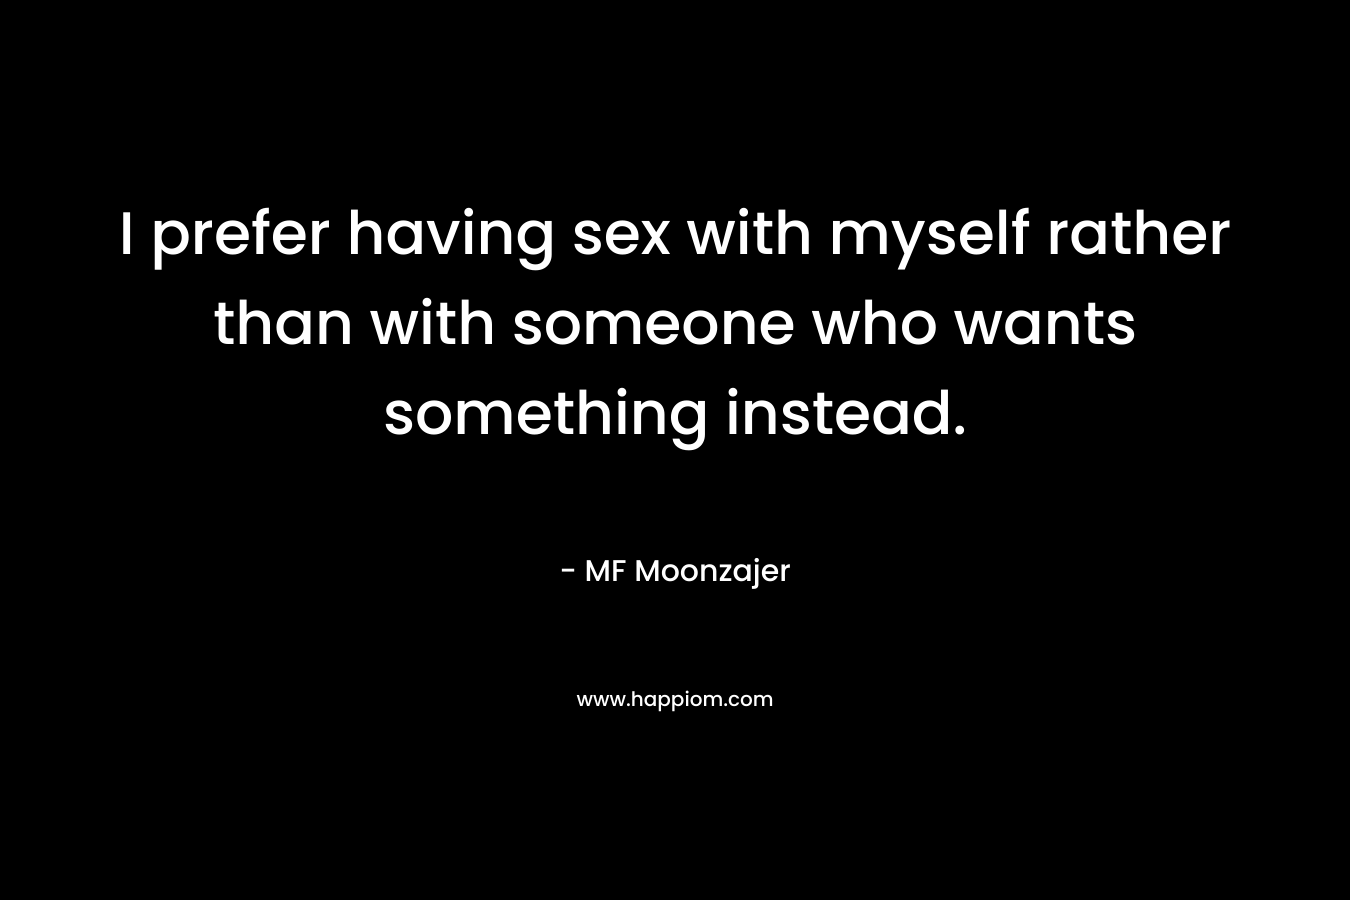 I prefer having sex with myself rather than with someone who wants something instead.